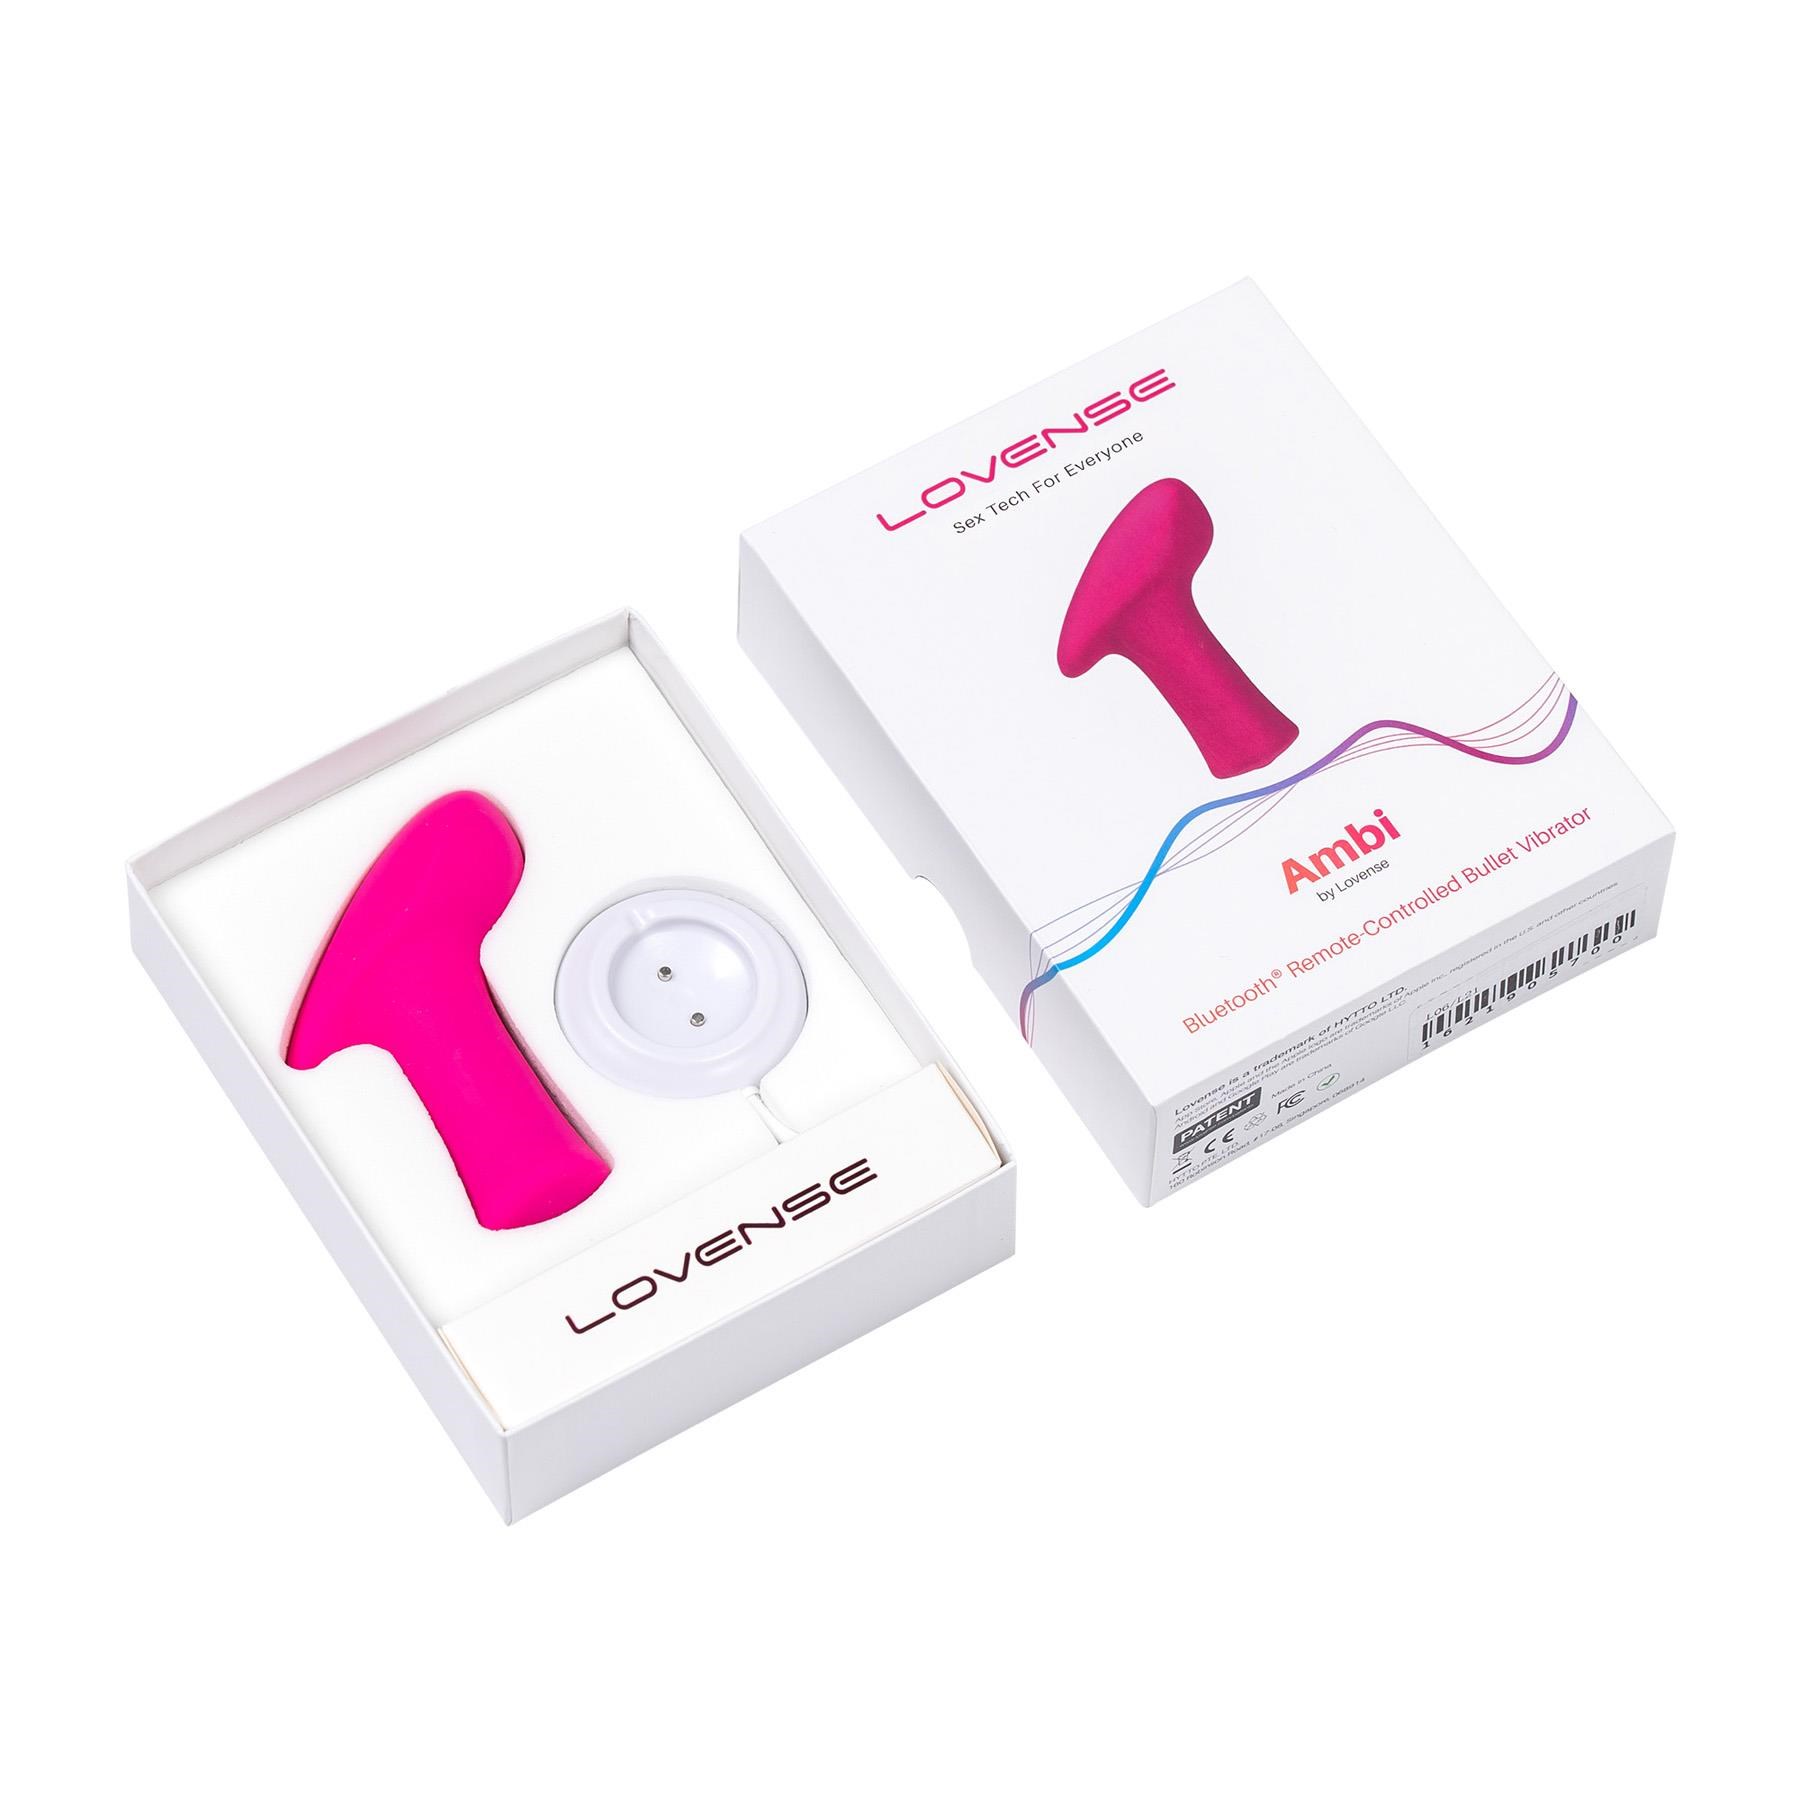 Lovense Bluetooth Ambi Bullet Vibrator - Product and Packaging